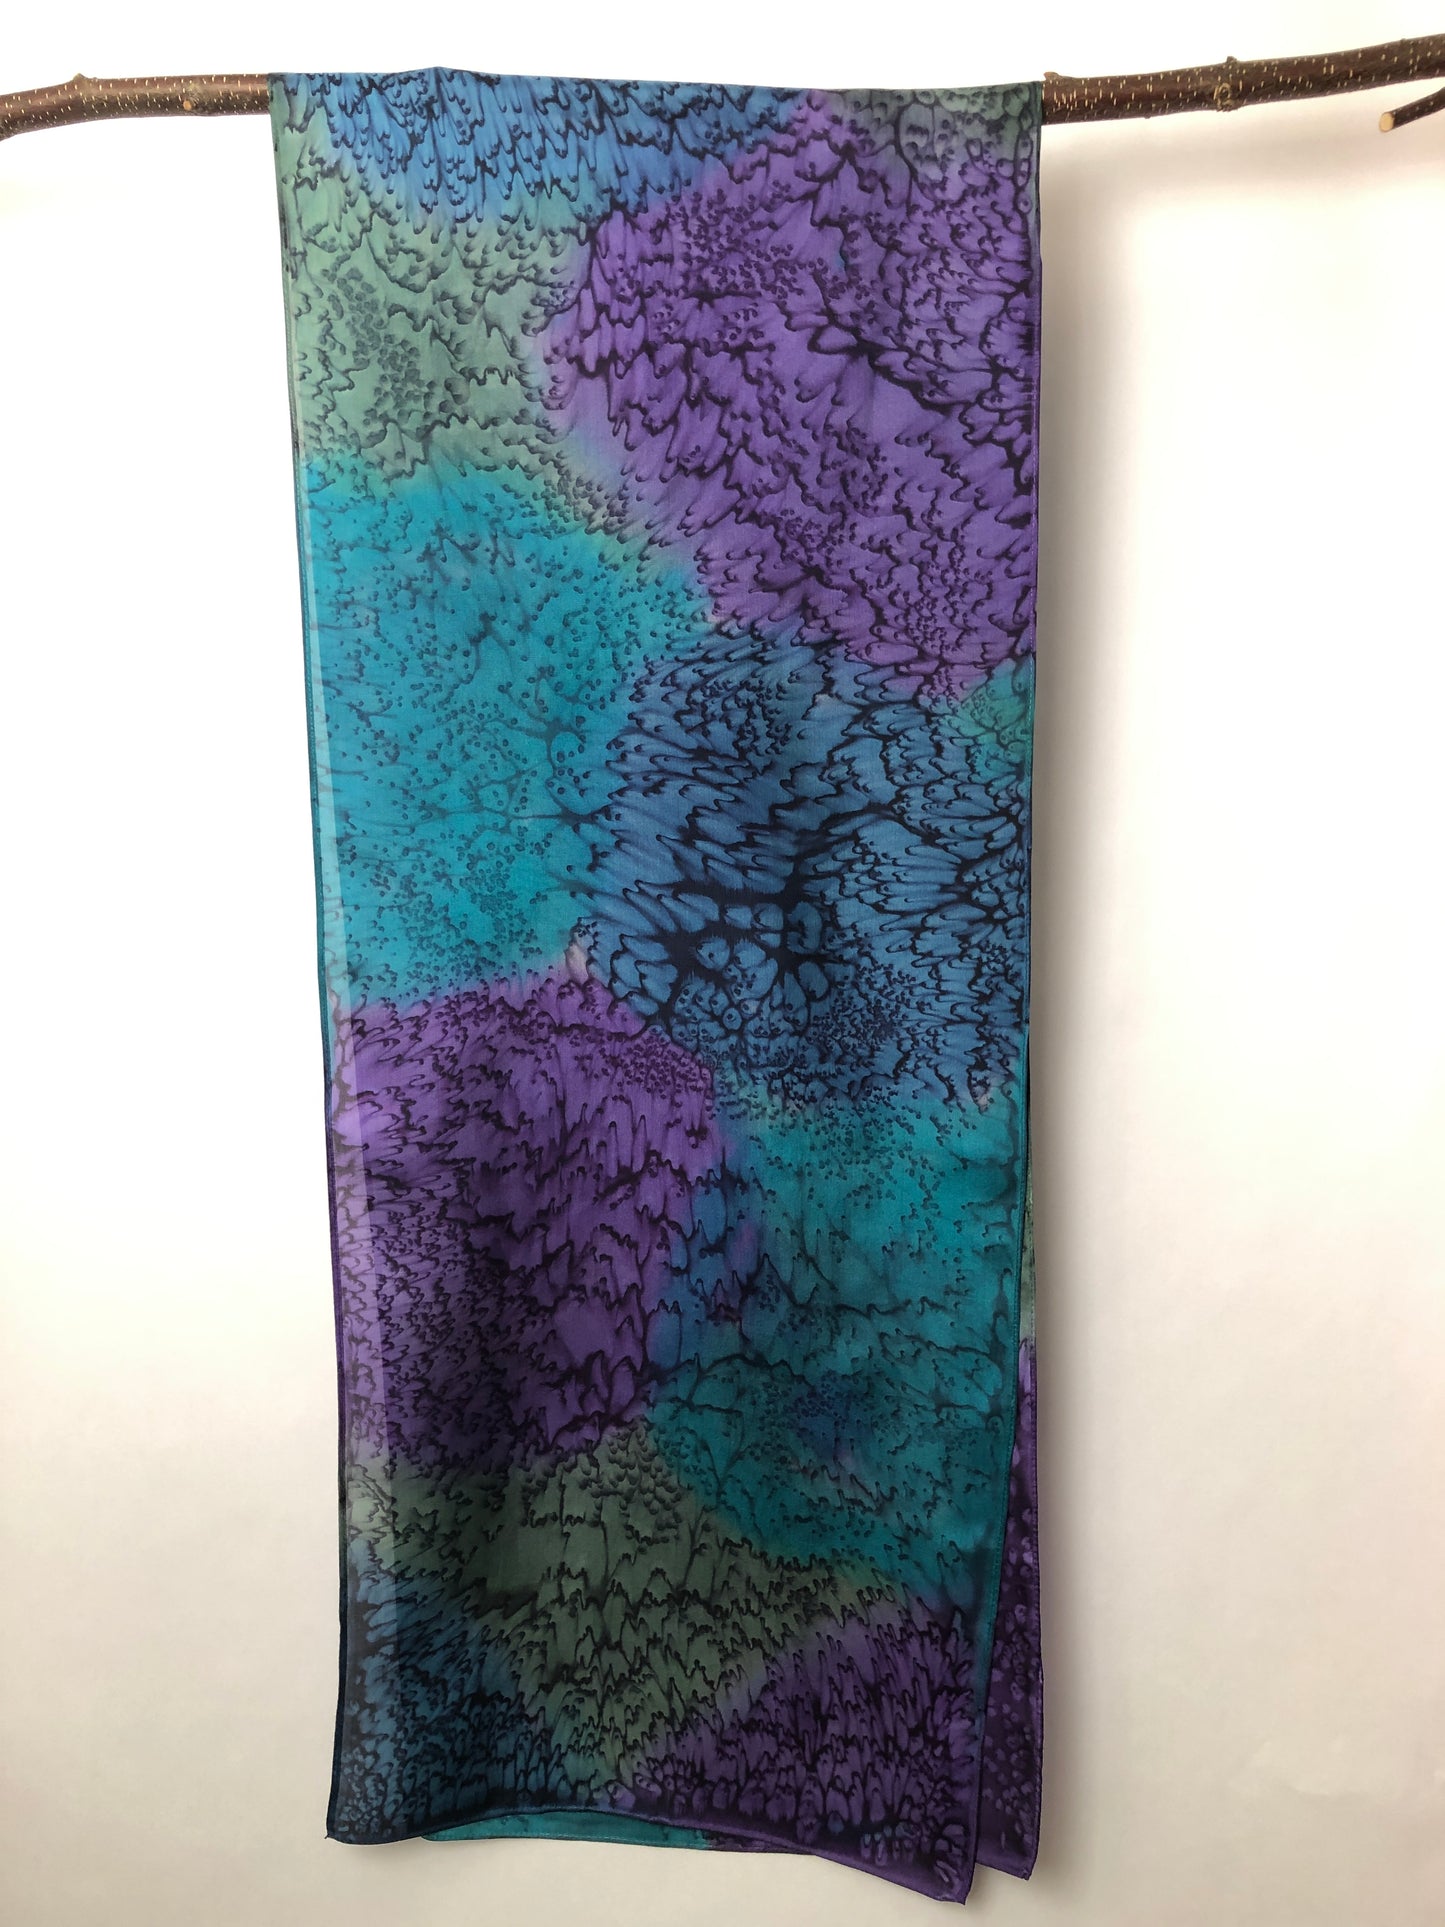 “Purple and Green Mermaid" - Hand-dyed Silk Scarf - $115